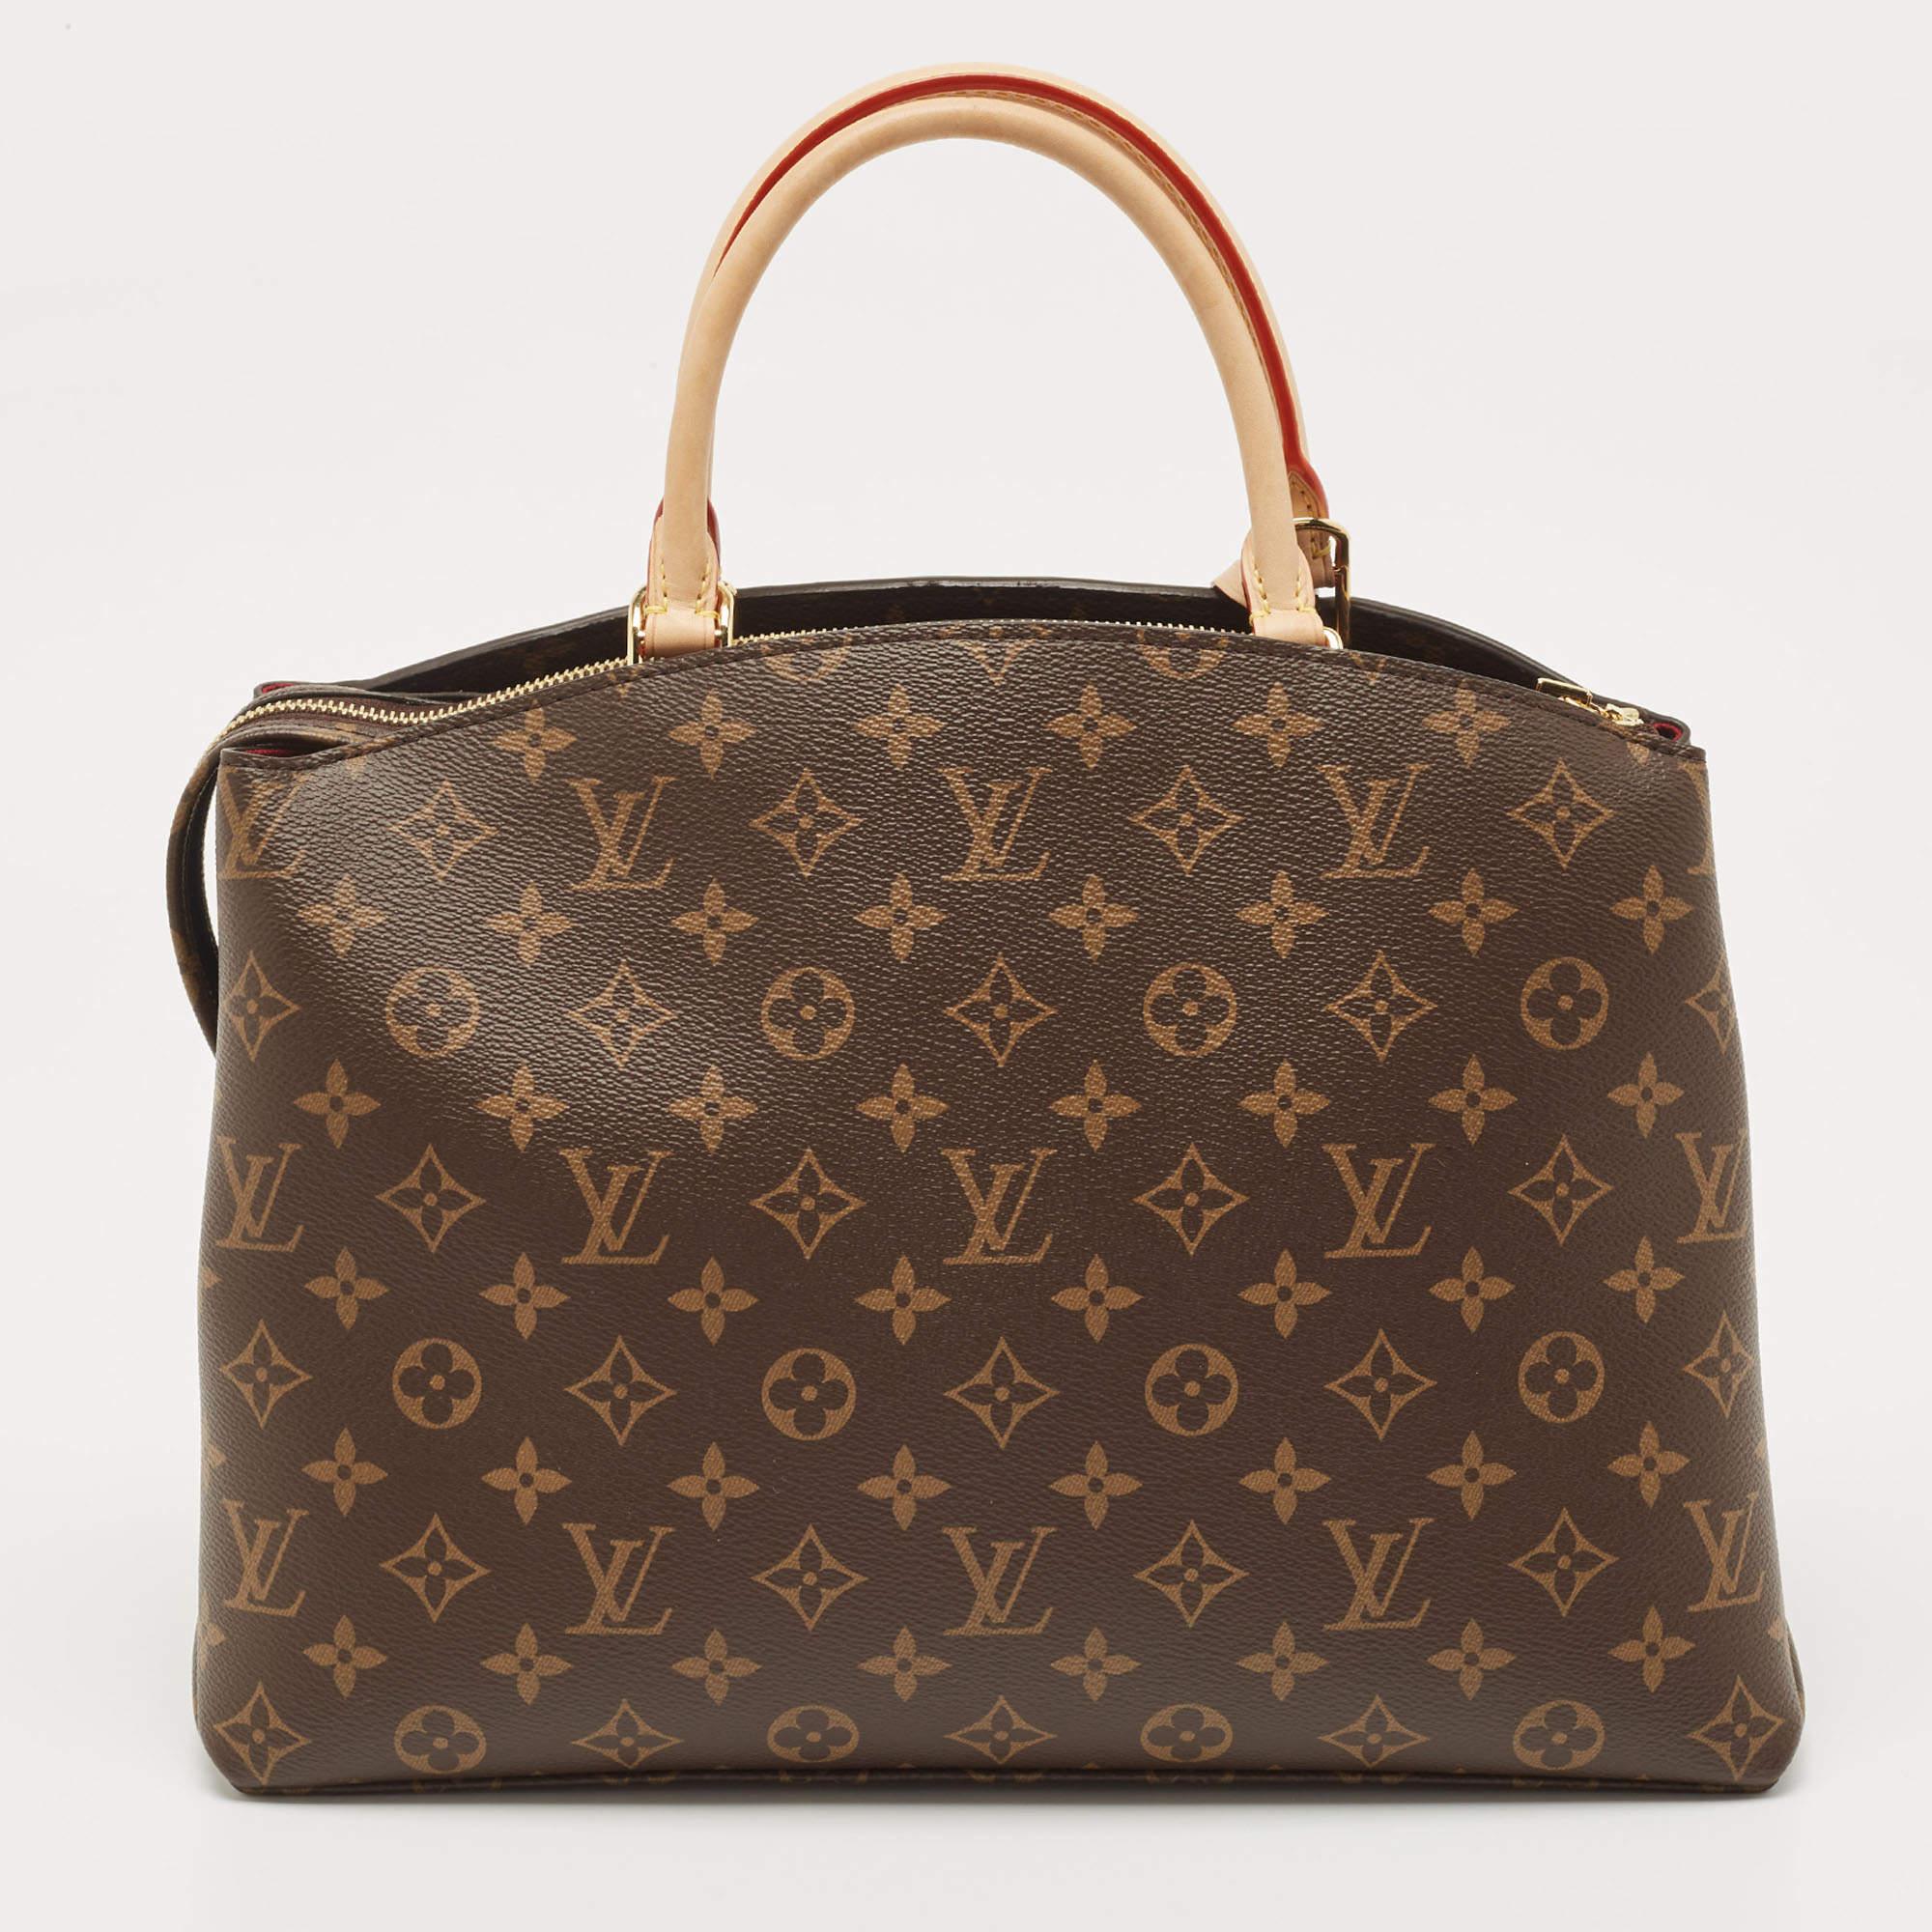 Thoughtful details, high quality, and everyday convenience mark this designer bag for women by Louis Vuitton. The bag is sewn with skill to deliver a refined look and an impeccable finish.

Includes: Original Dustbag, Detachable Strap, Padlock &